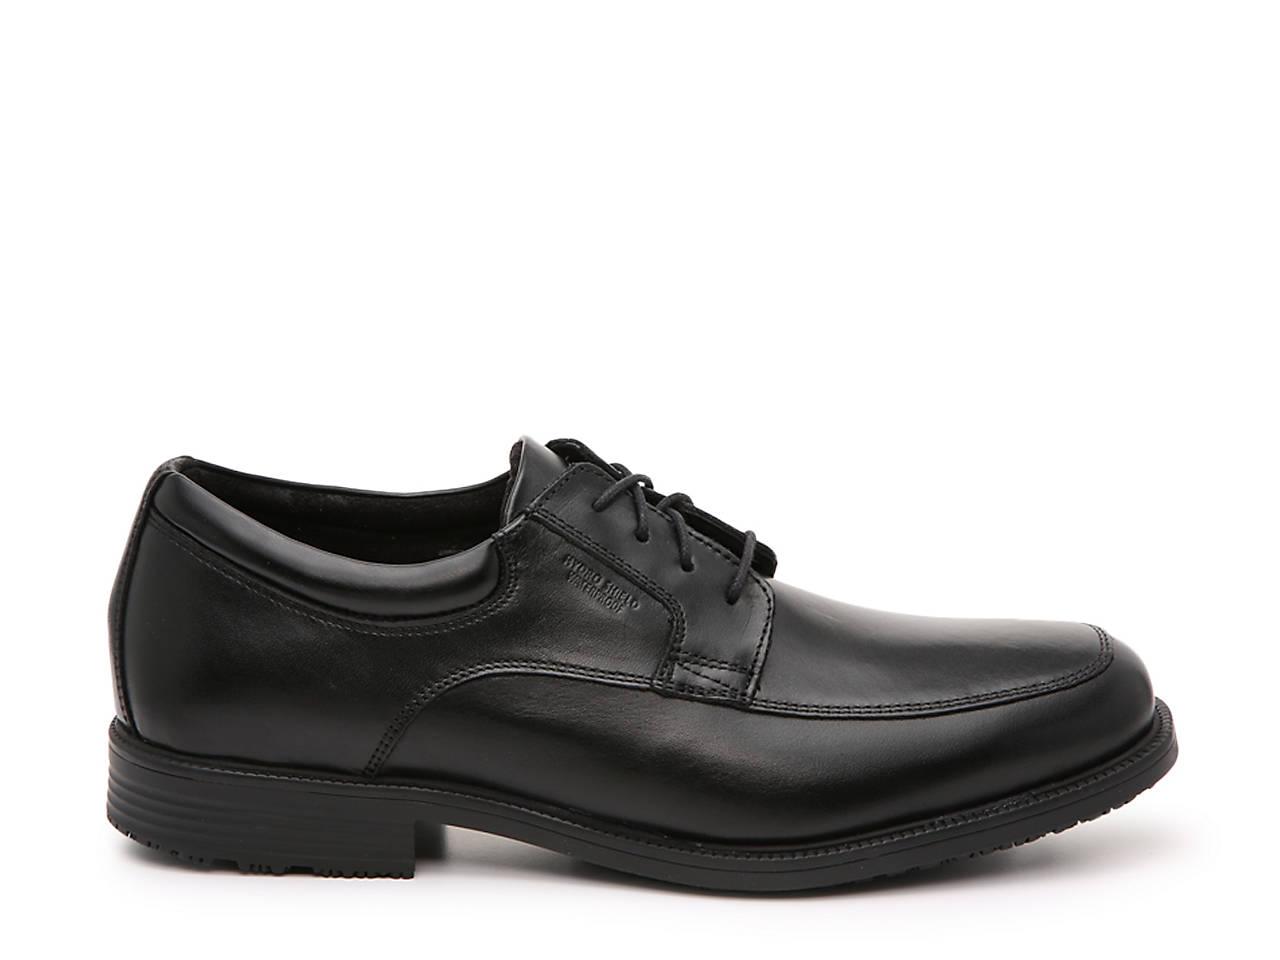 Rockport Leather Essential Oxford in Black for Men - Lyst